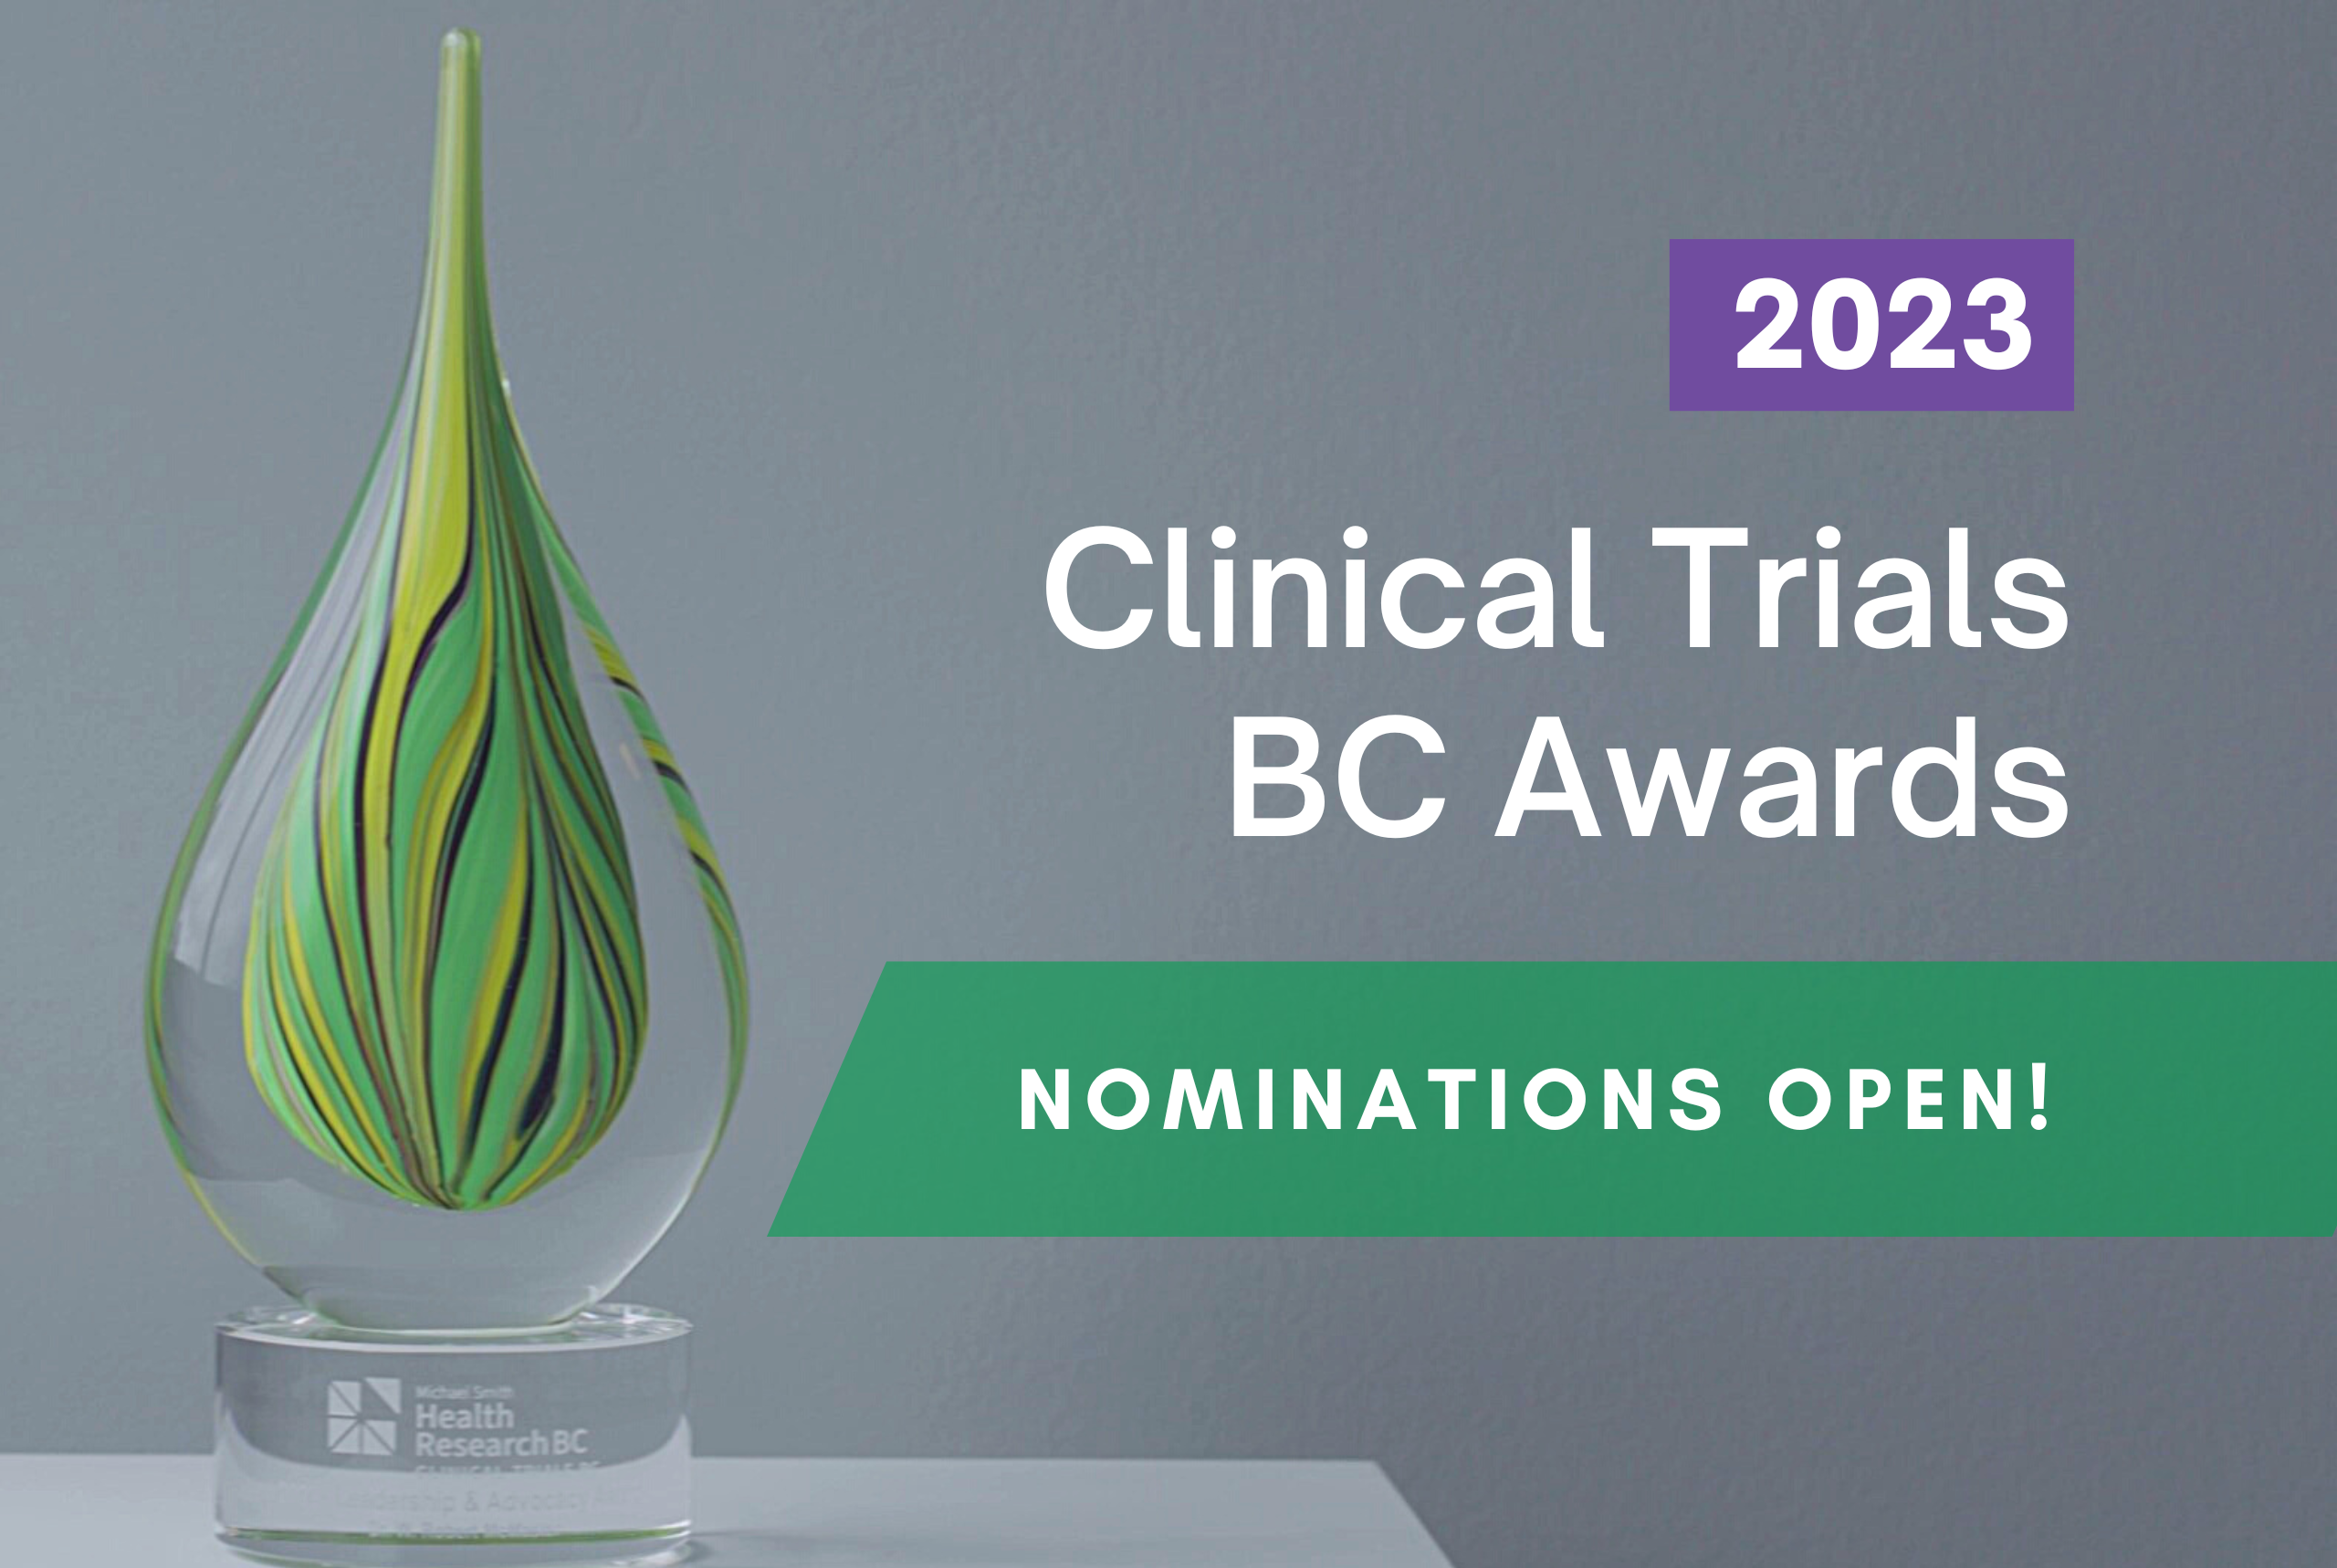 2023 Clinical Trials BC Awards now open for nominations